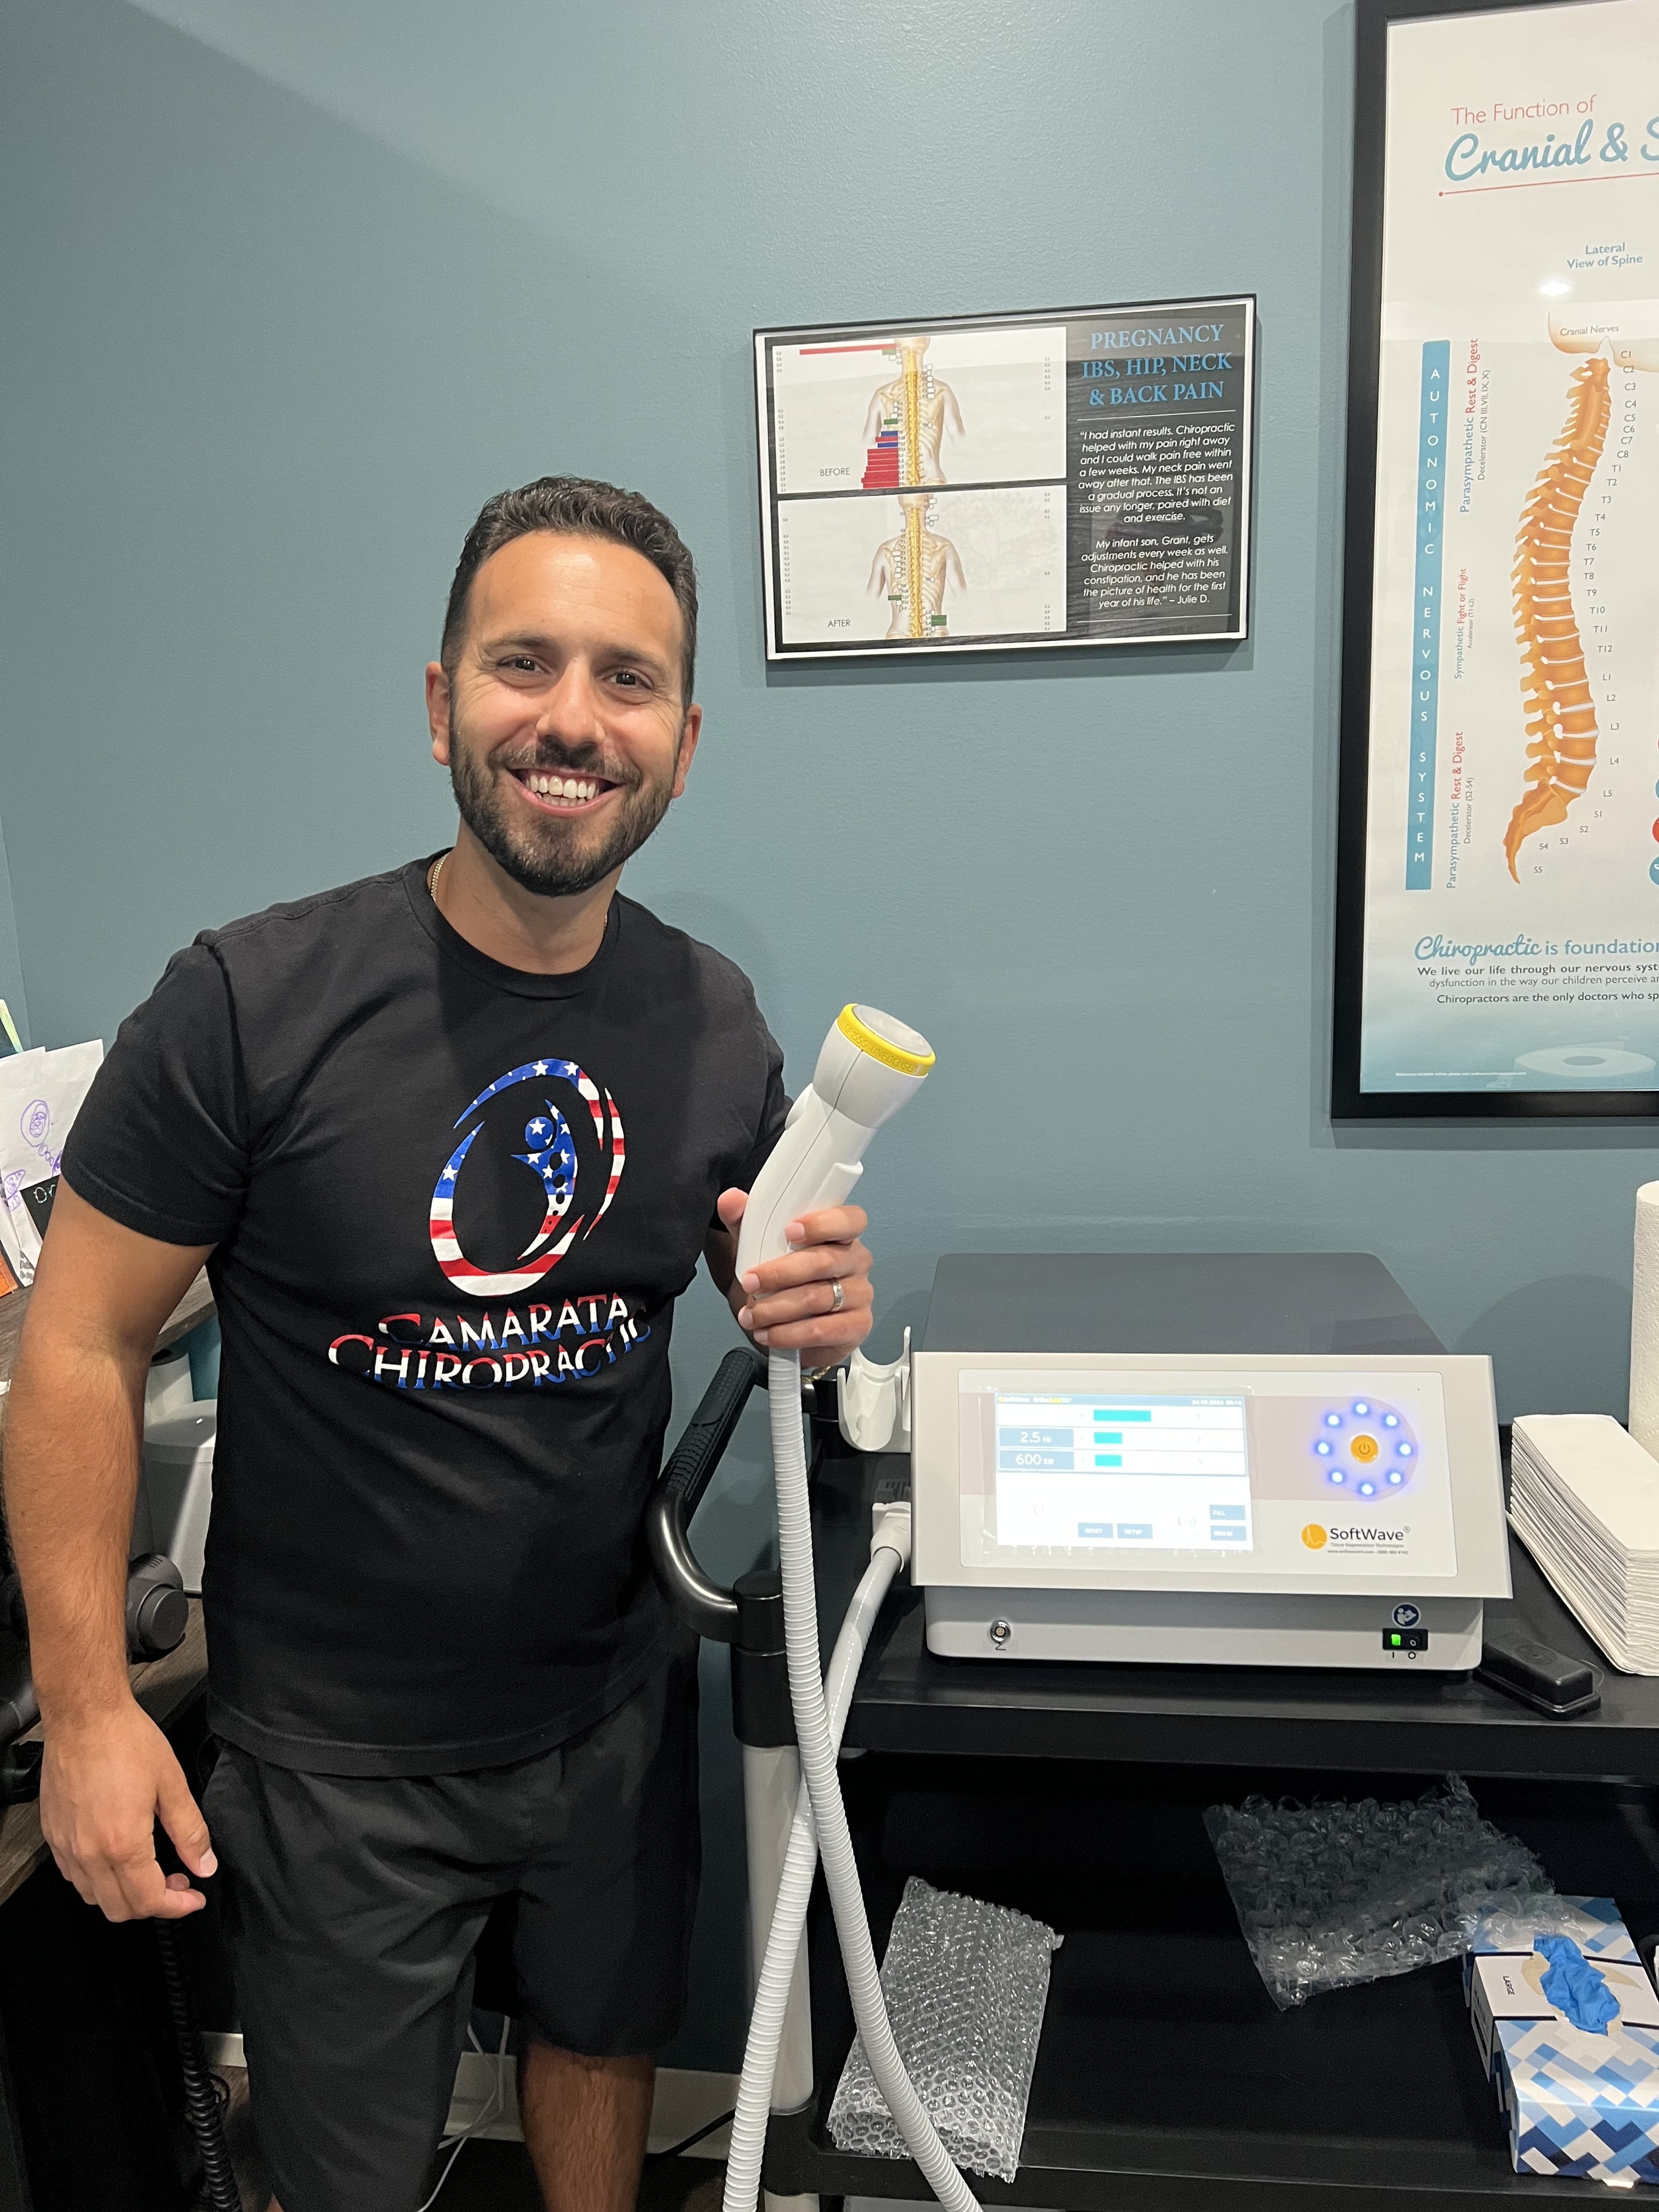 SoftWave Therapy in Victor NY - Rhino Chiropractic